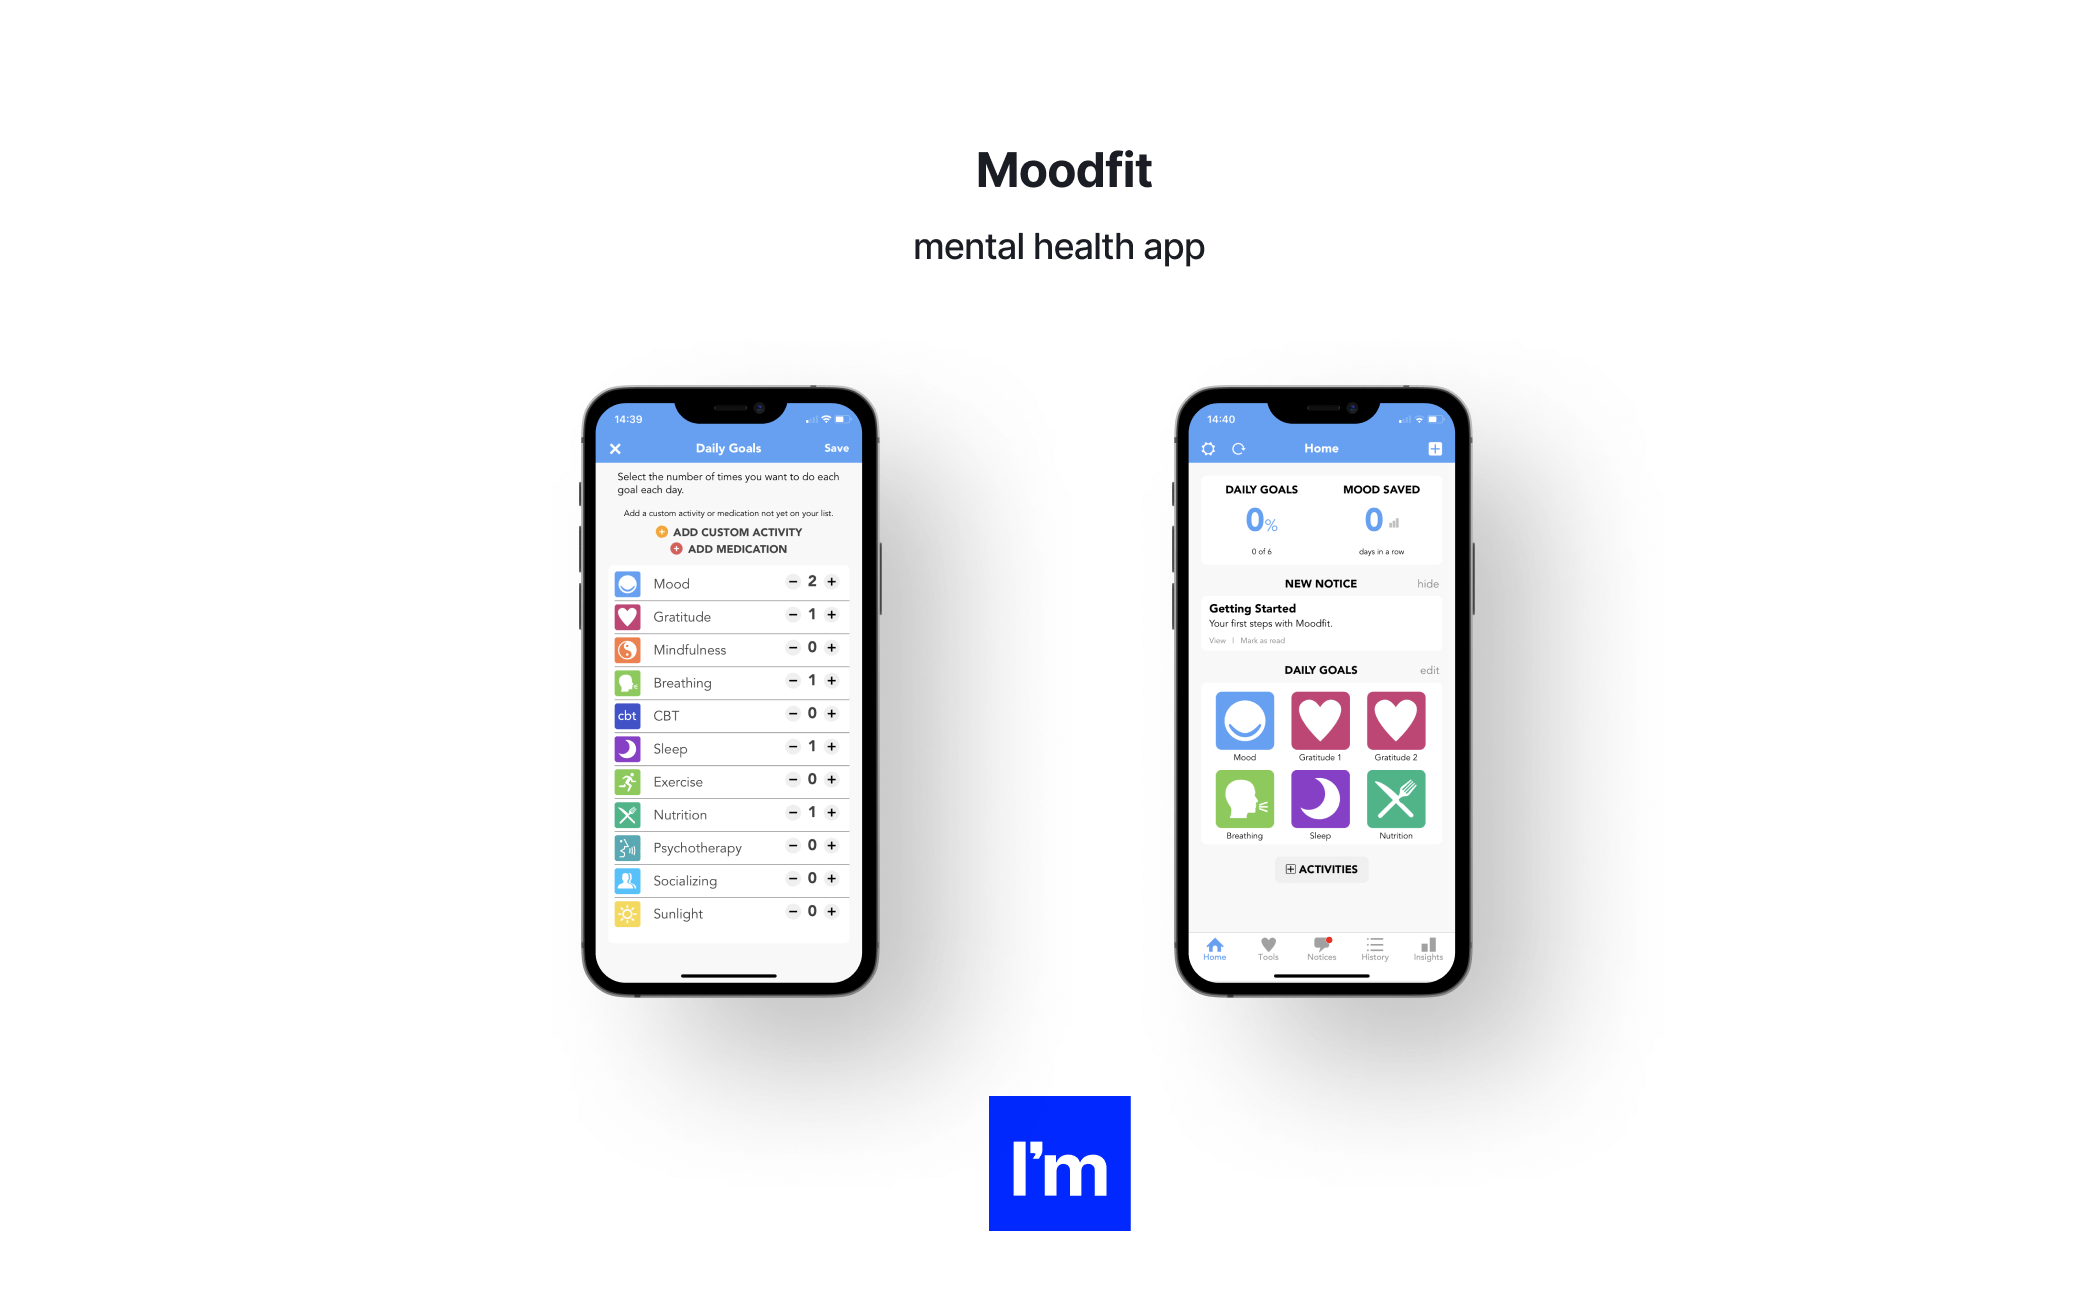 15 Mhealth Apps - MoodFit